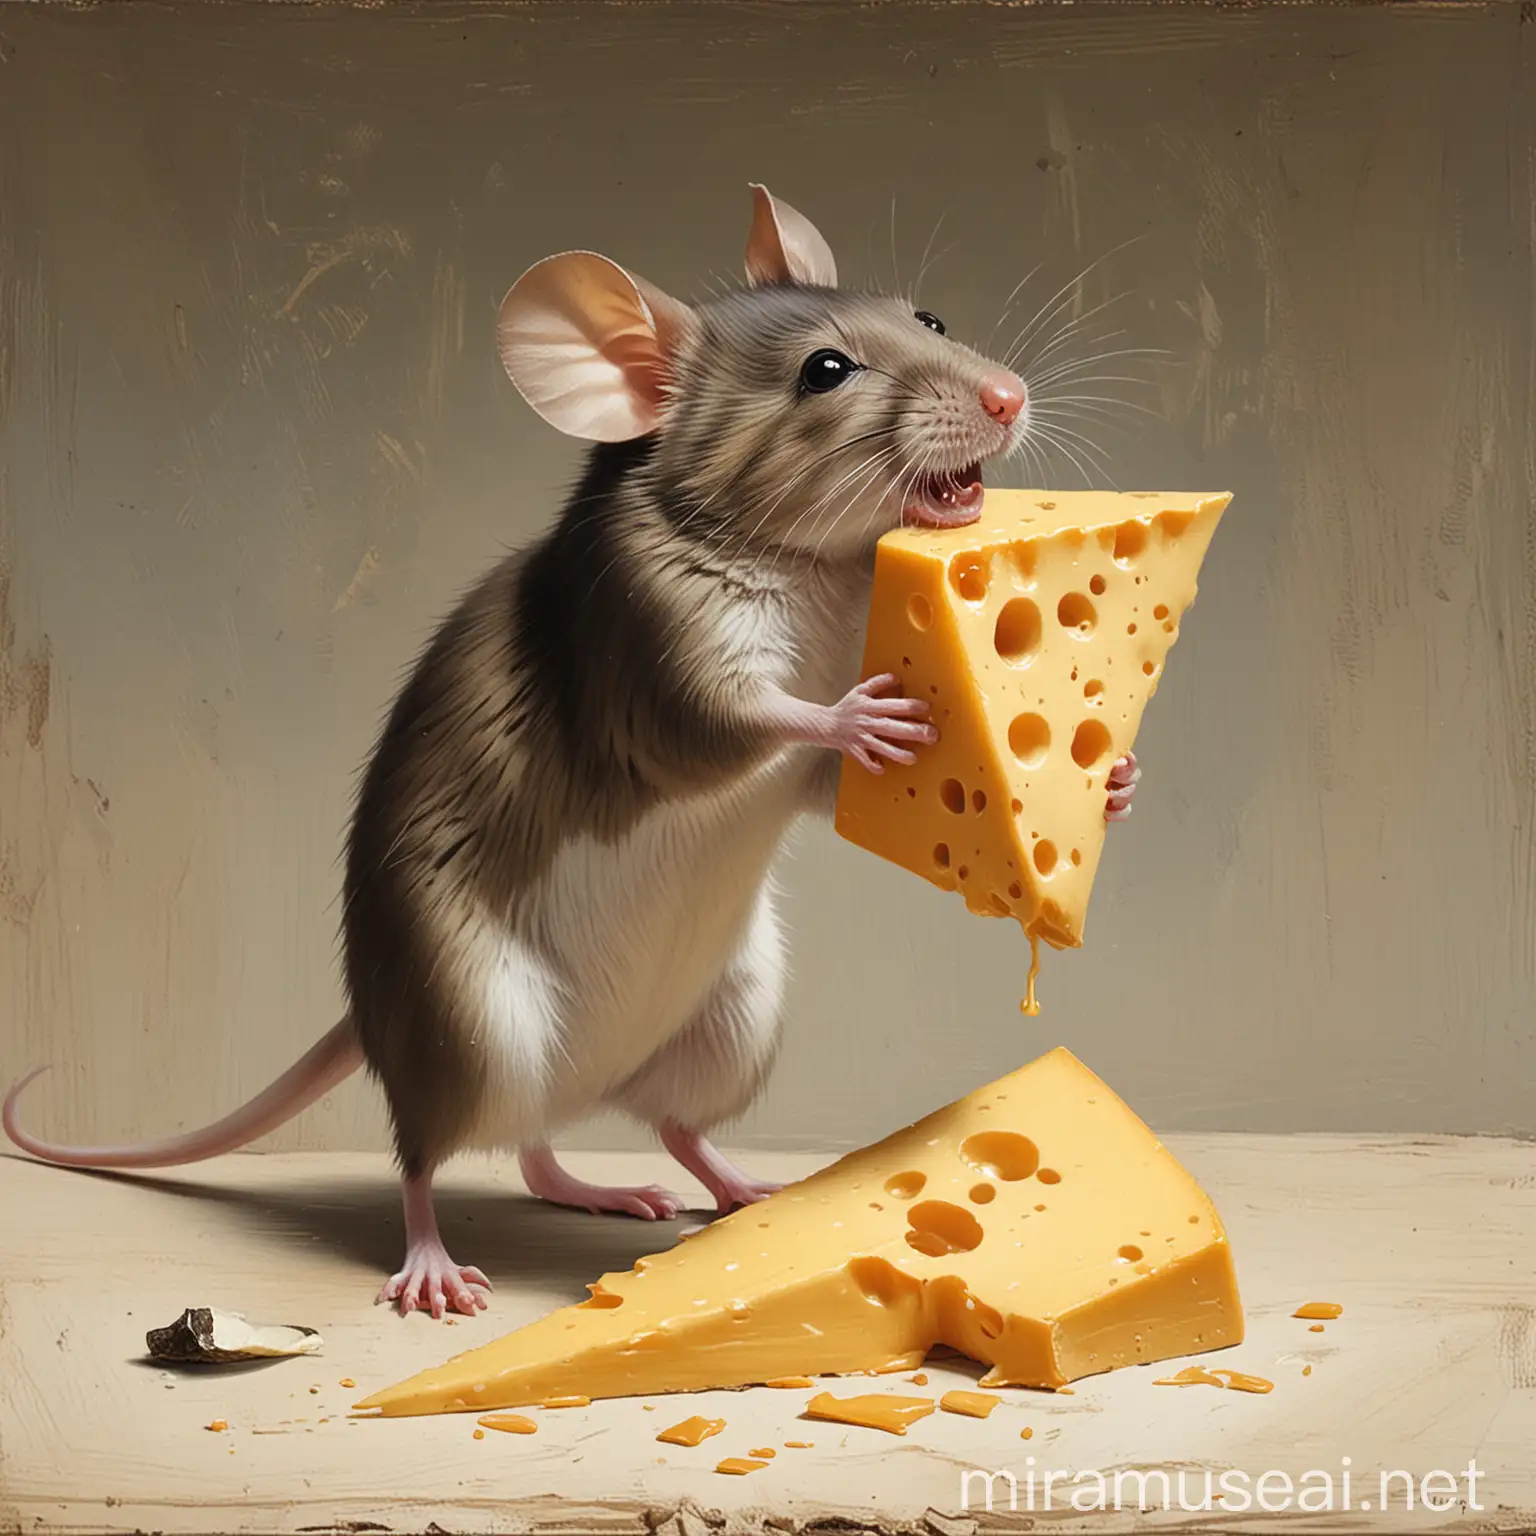 Mouse Enjoying a Wedge of Cheese in a Whimsical Painting